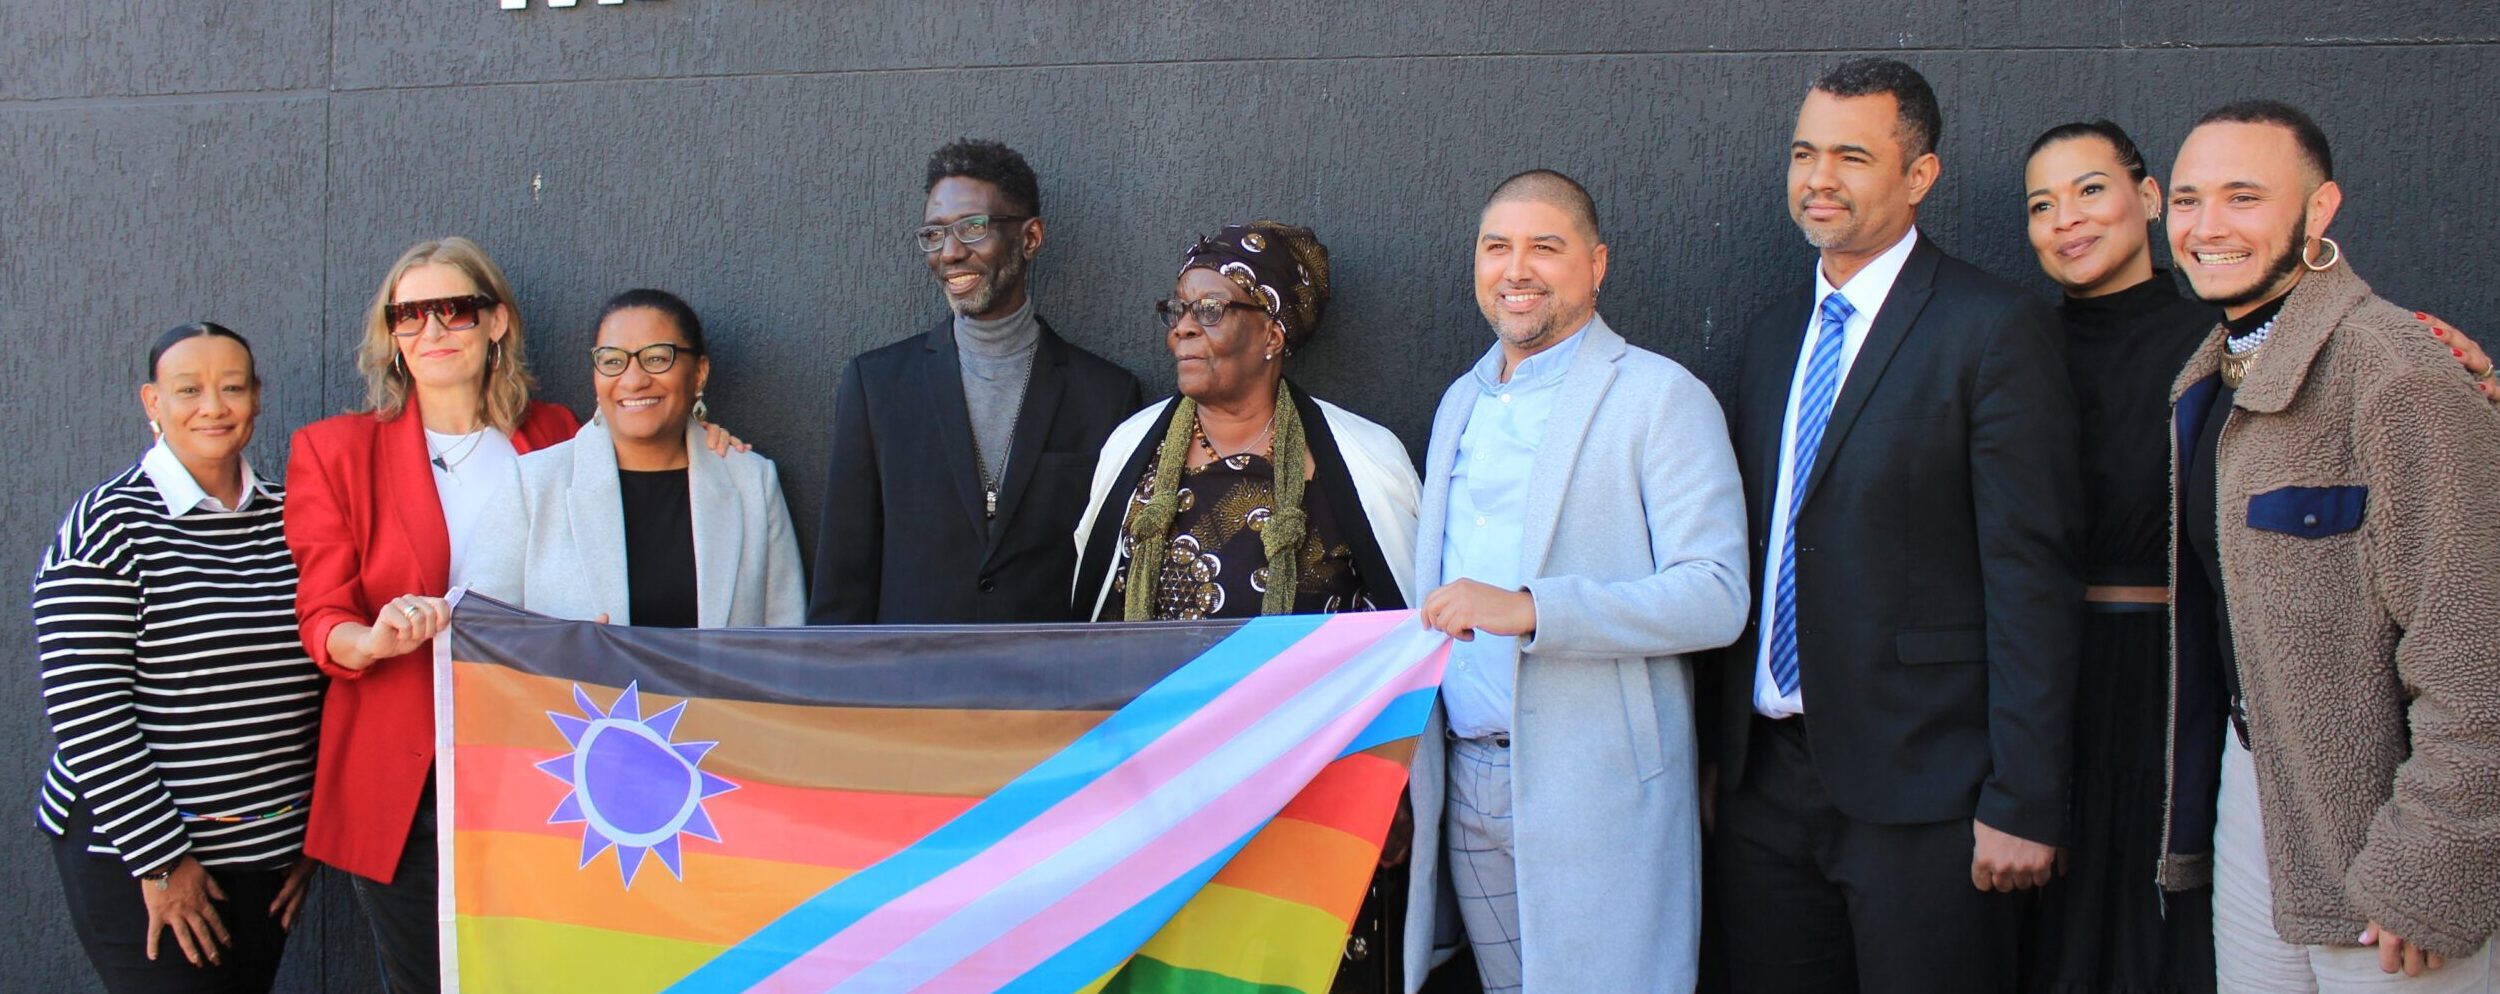 Namibia’s groundbreaking ruling: a victory for LGBTIQ+ equality